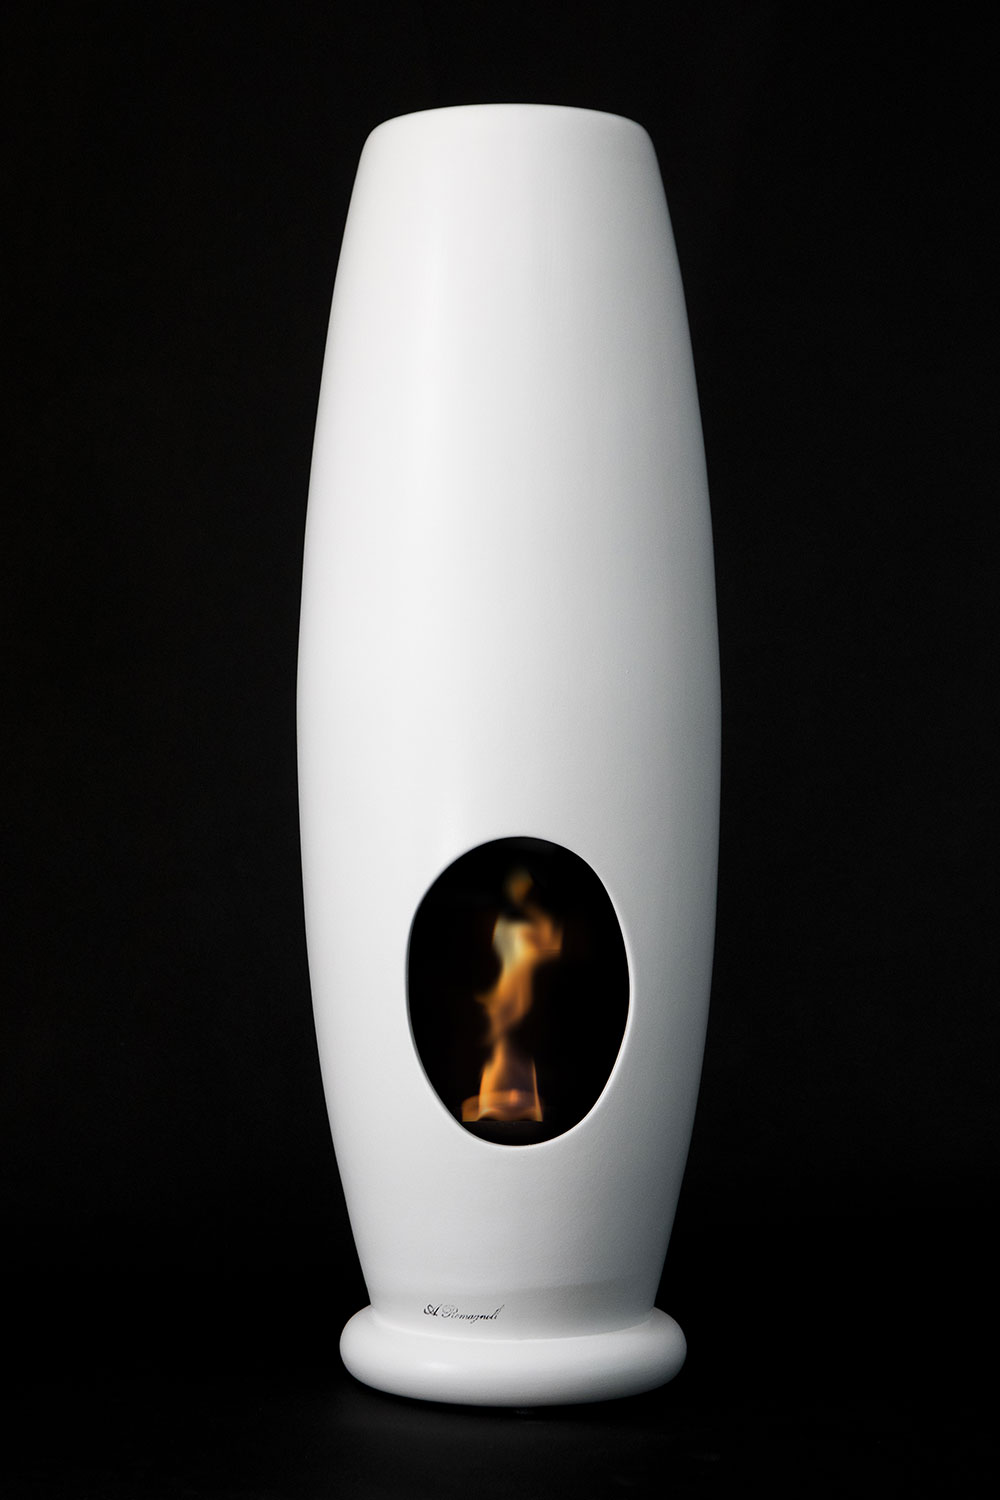 Classic - Handcrafted and artistic bio-fireplace hand painted with non-toxic paint